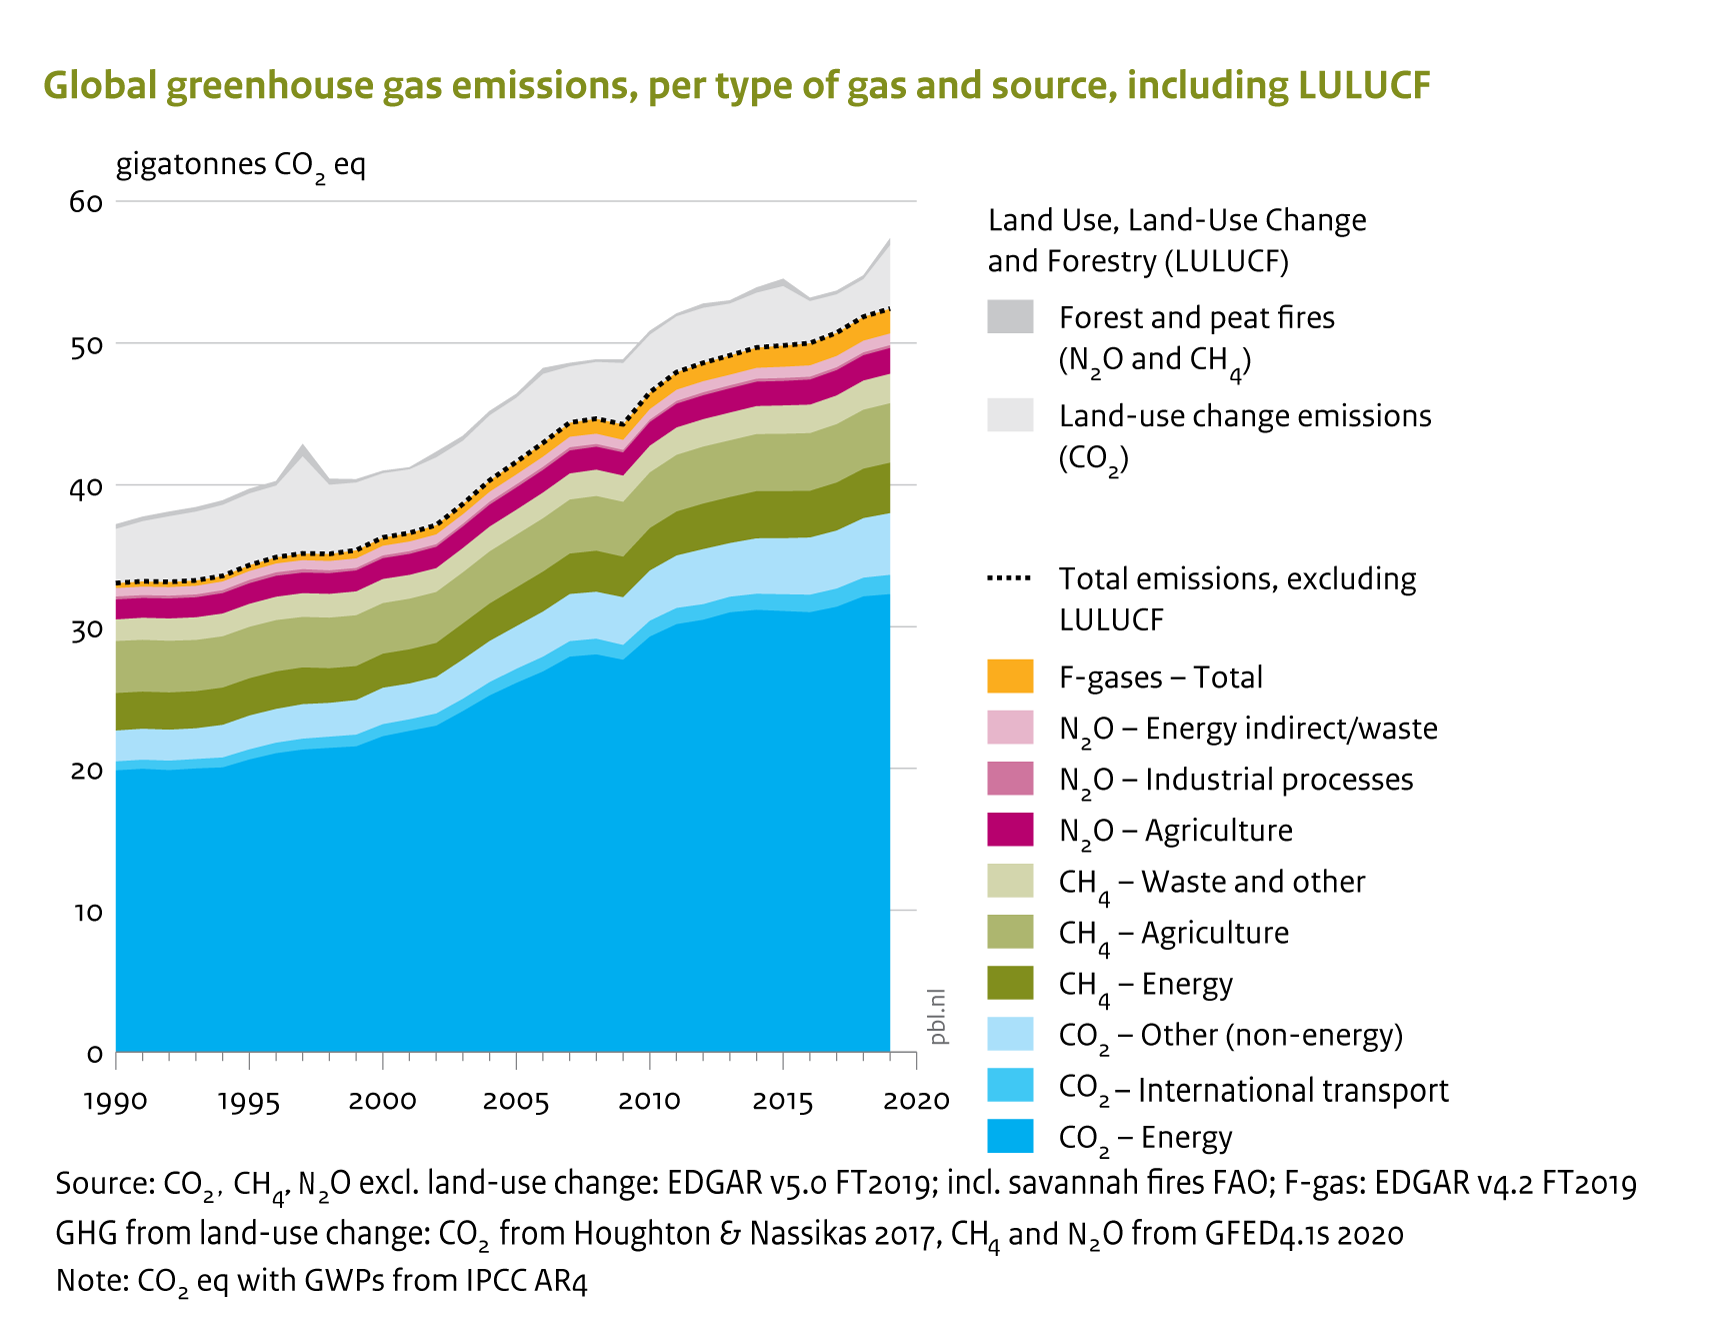 In 2019 the increase in global greenhouse gas emissions continued at a rate of 1.1% per year, reaching 52.4 gigatonnes of CO2 equivalent (GtCO2 eq), excluding land-use change.